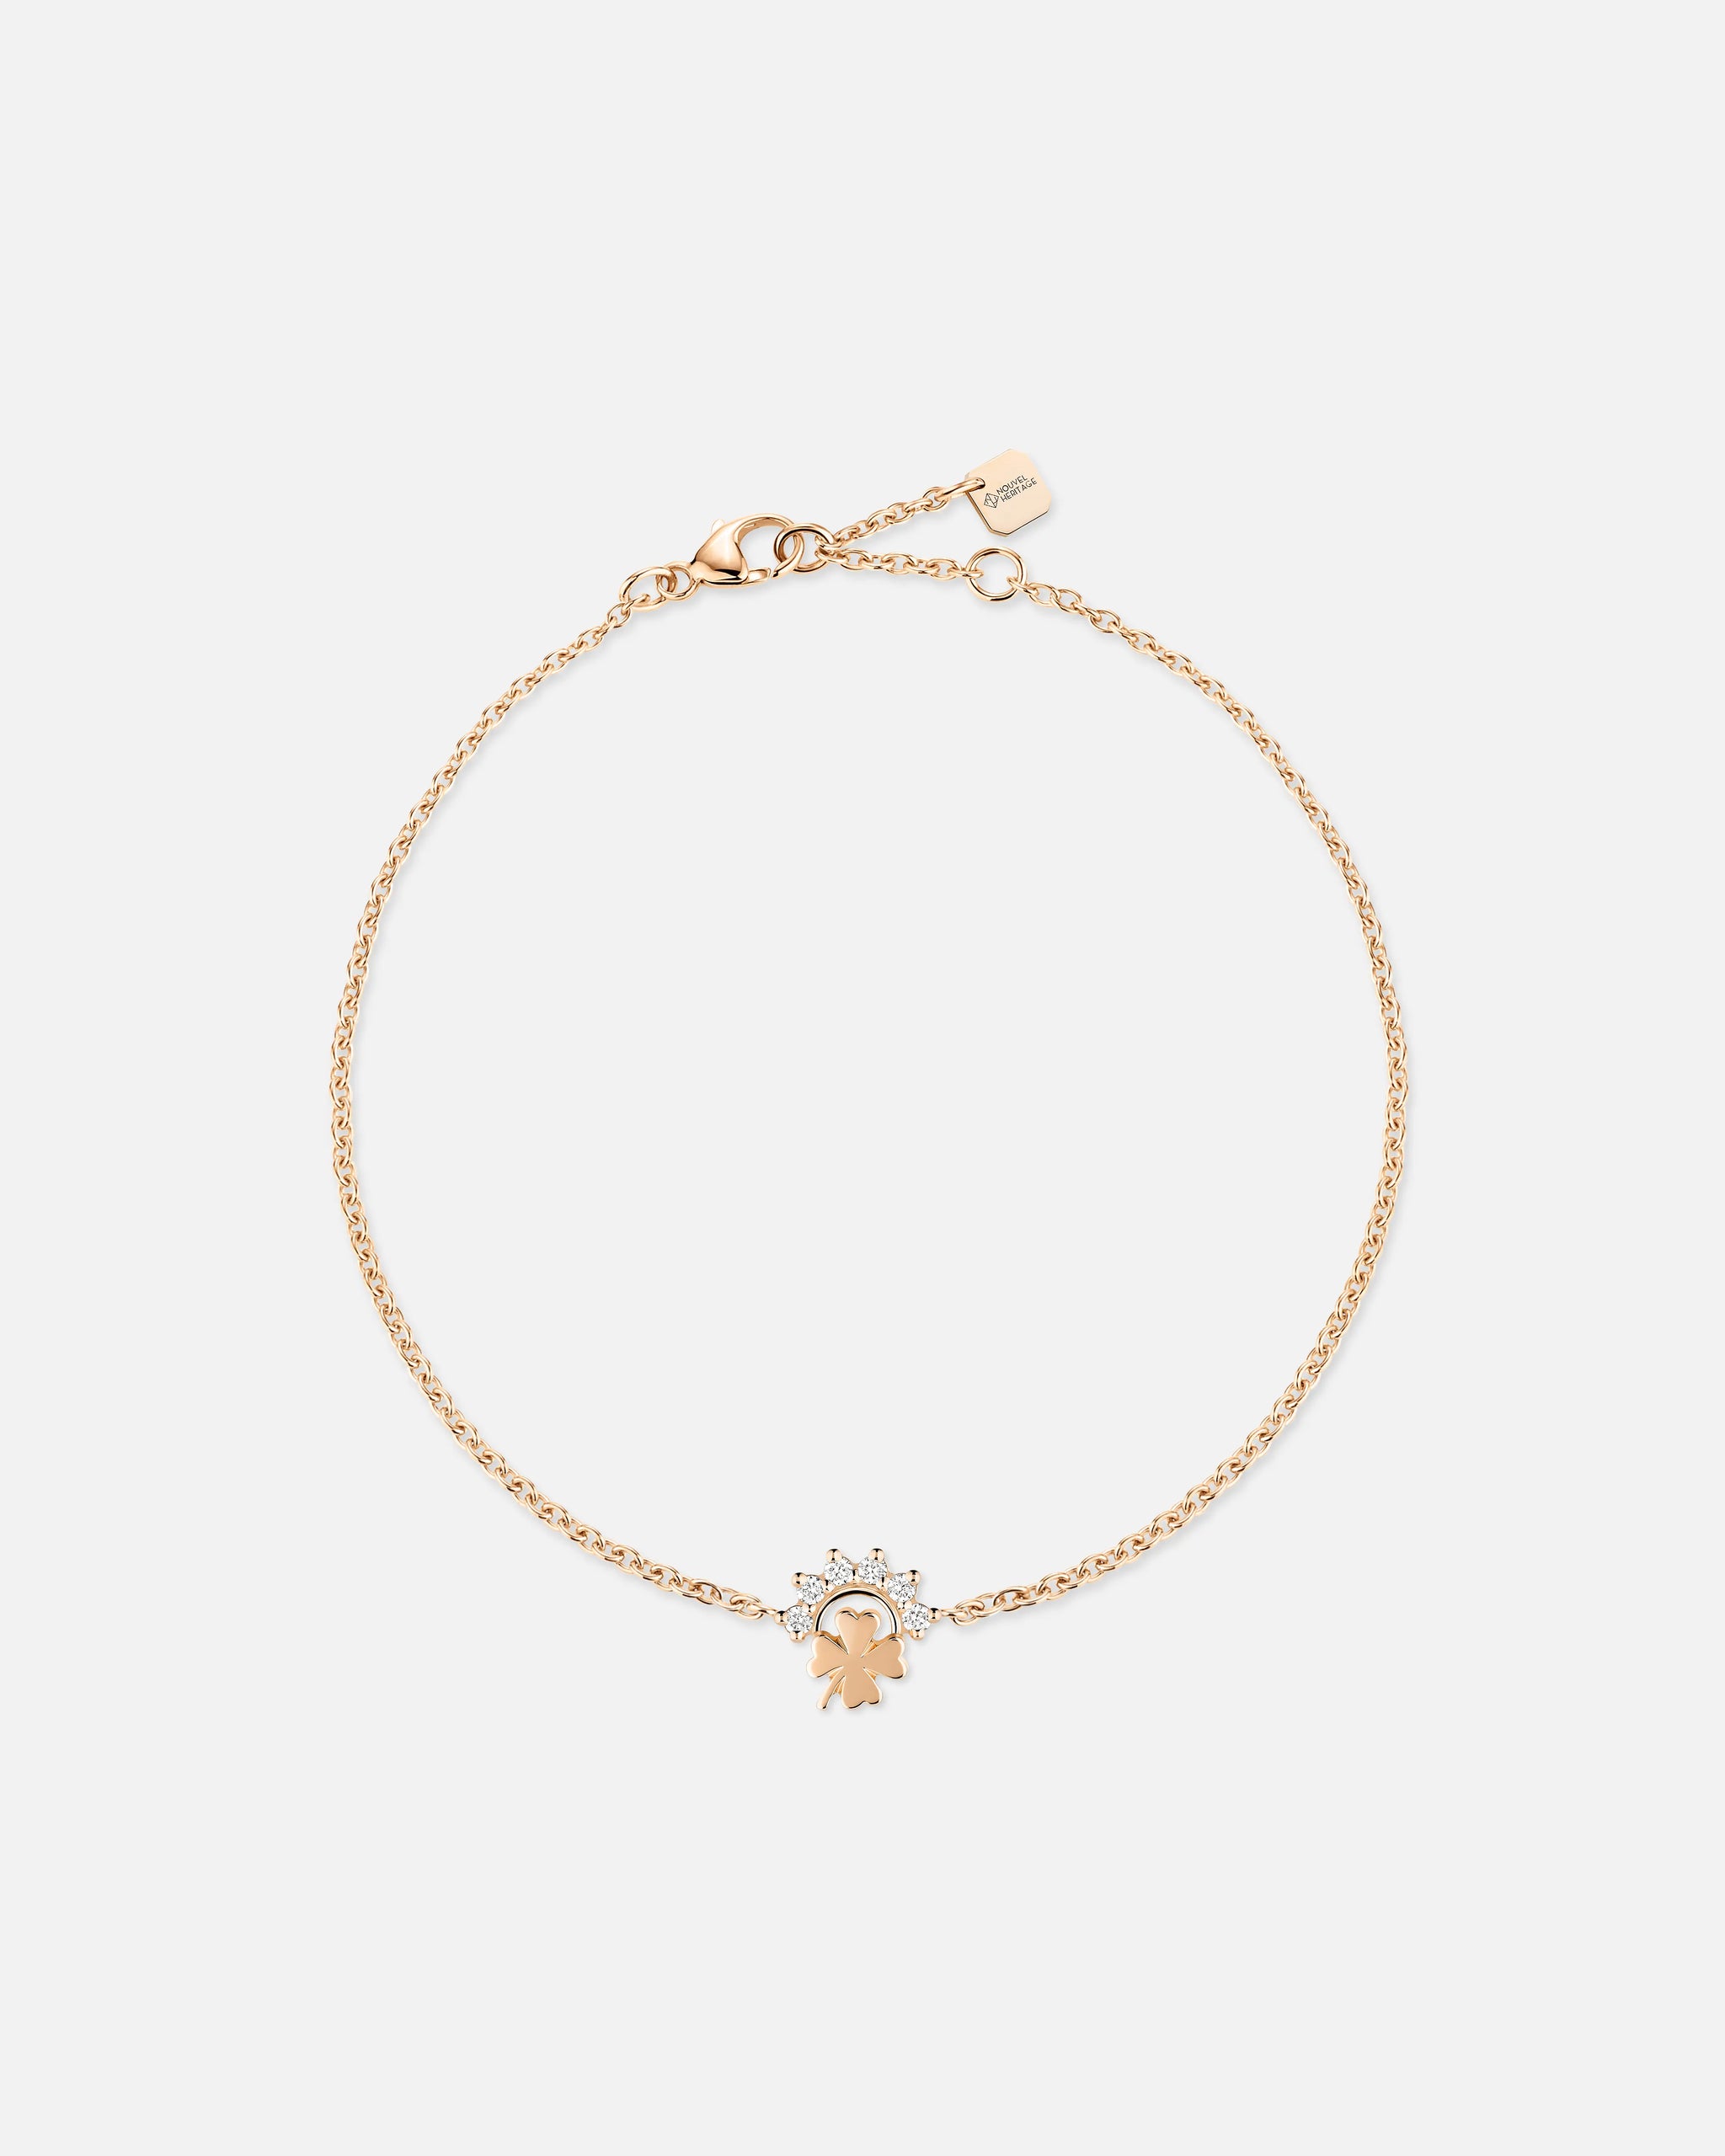 Small Luck Bracelet in Rose Gold - 1 - Nouvel Heritage